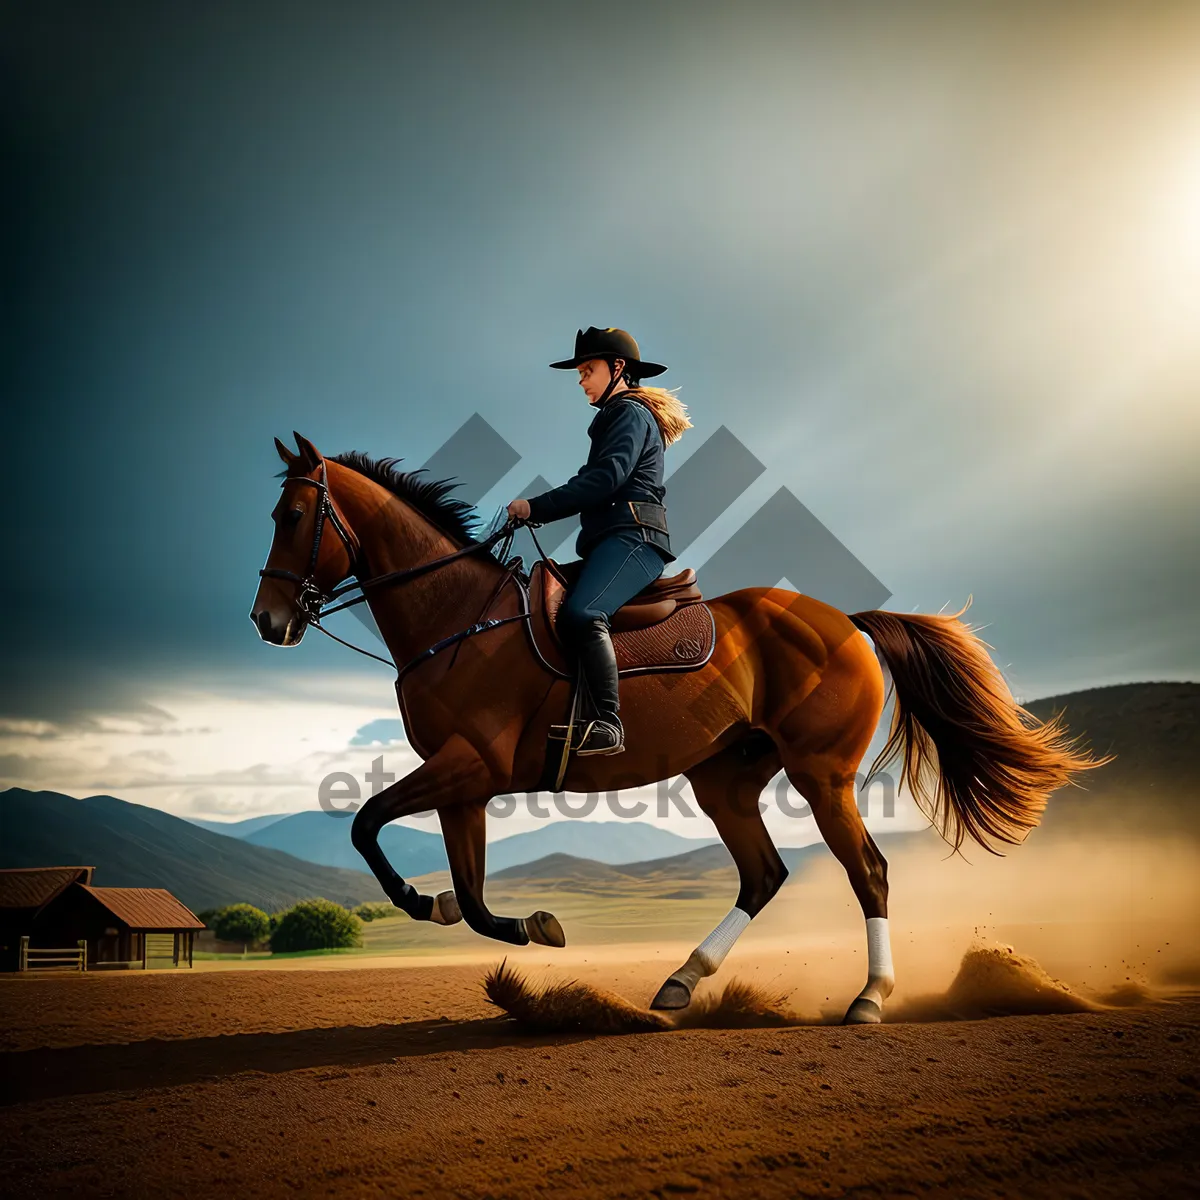 Picture of Desert Ride: Equestrian Cowboy on Horseback under Clear Sky